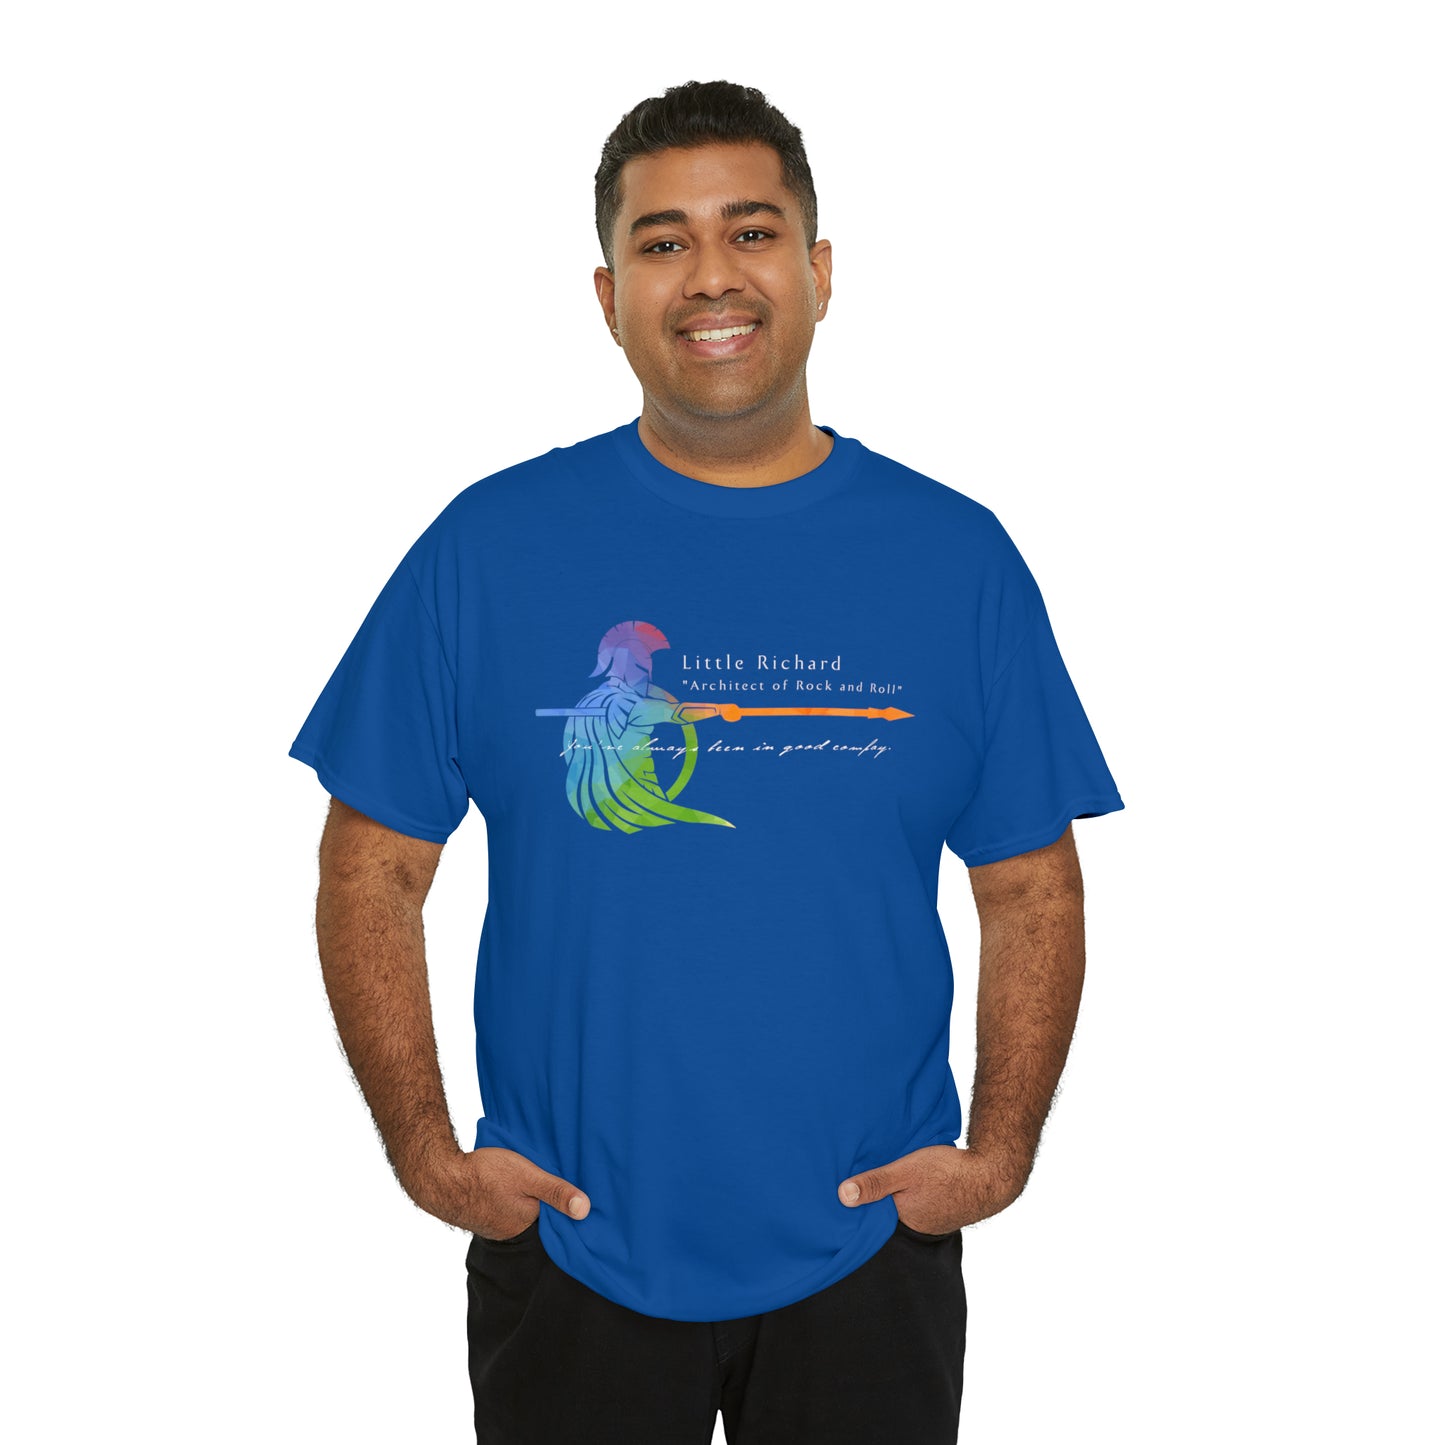 Little Richard | "Architect of Rock and Roll" | Pride T-Shirt